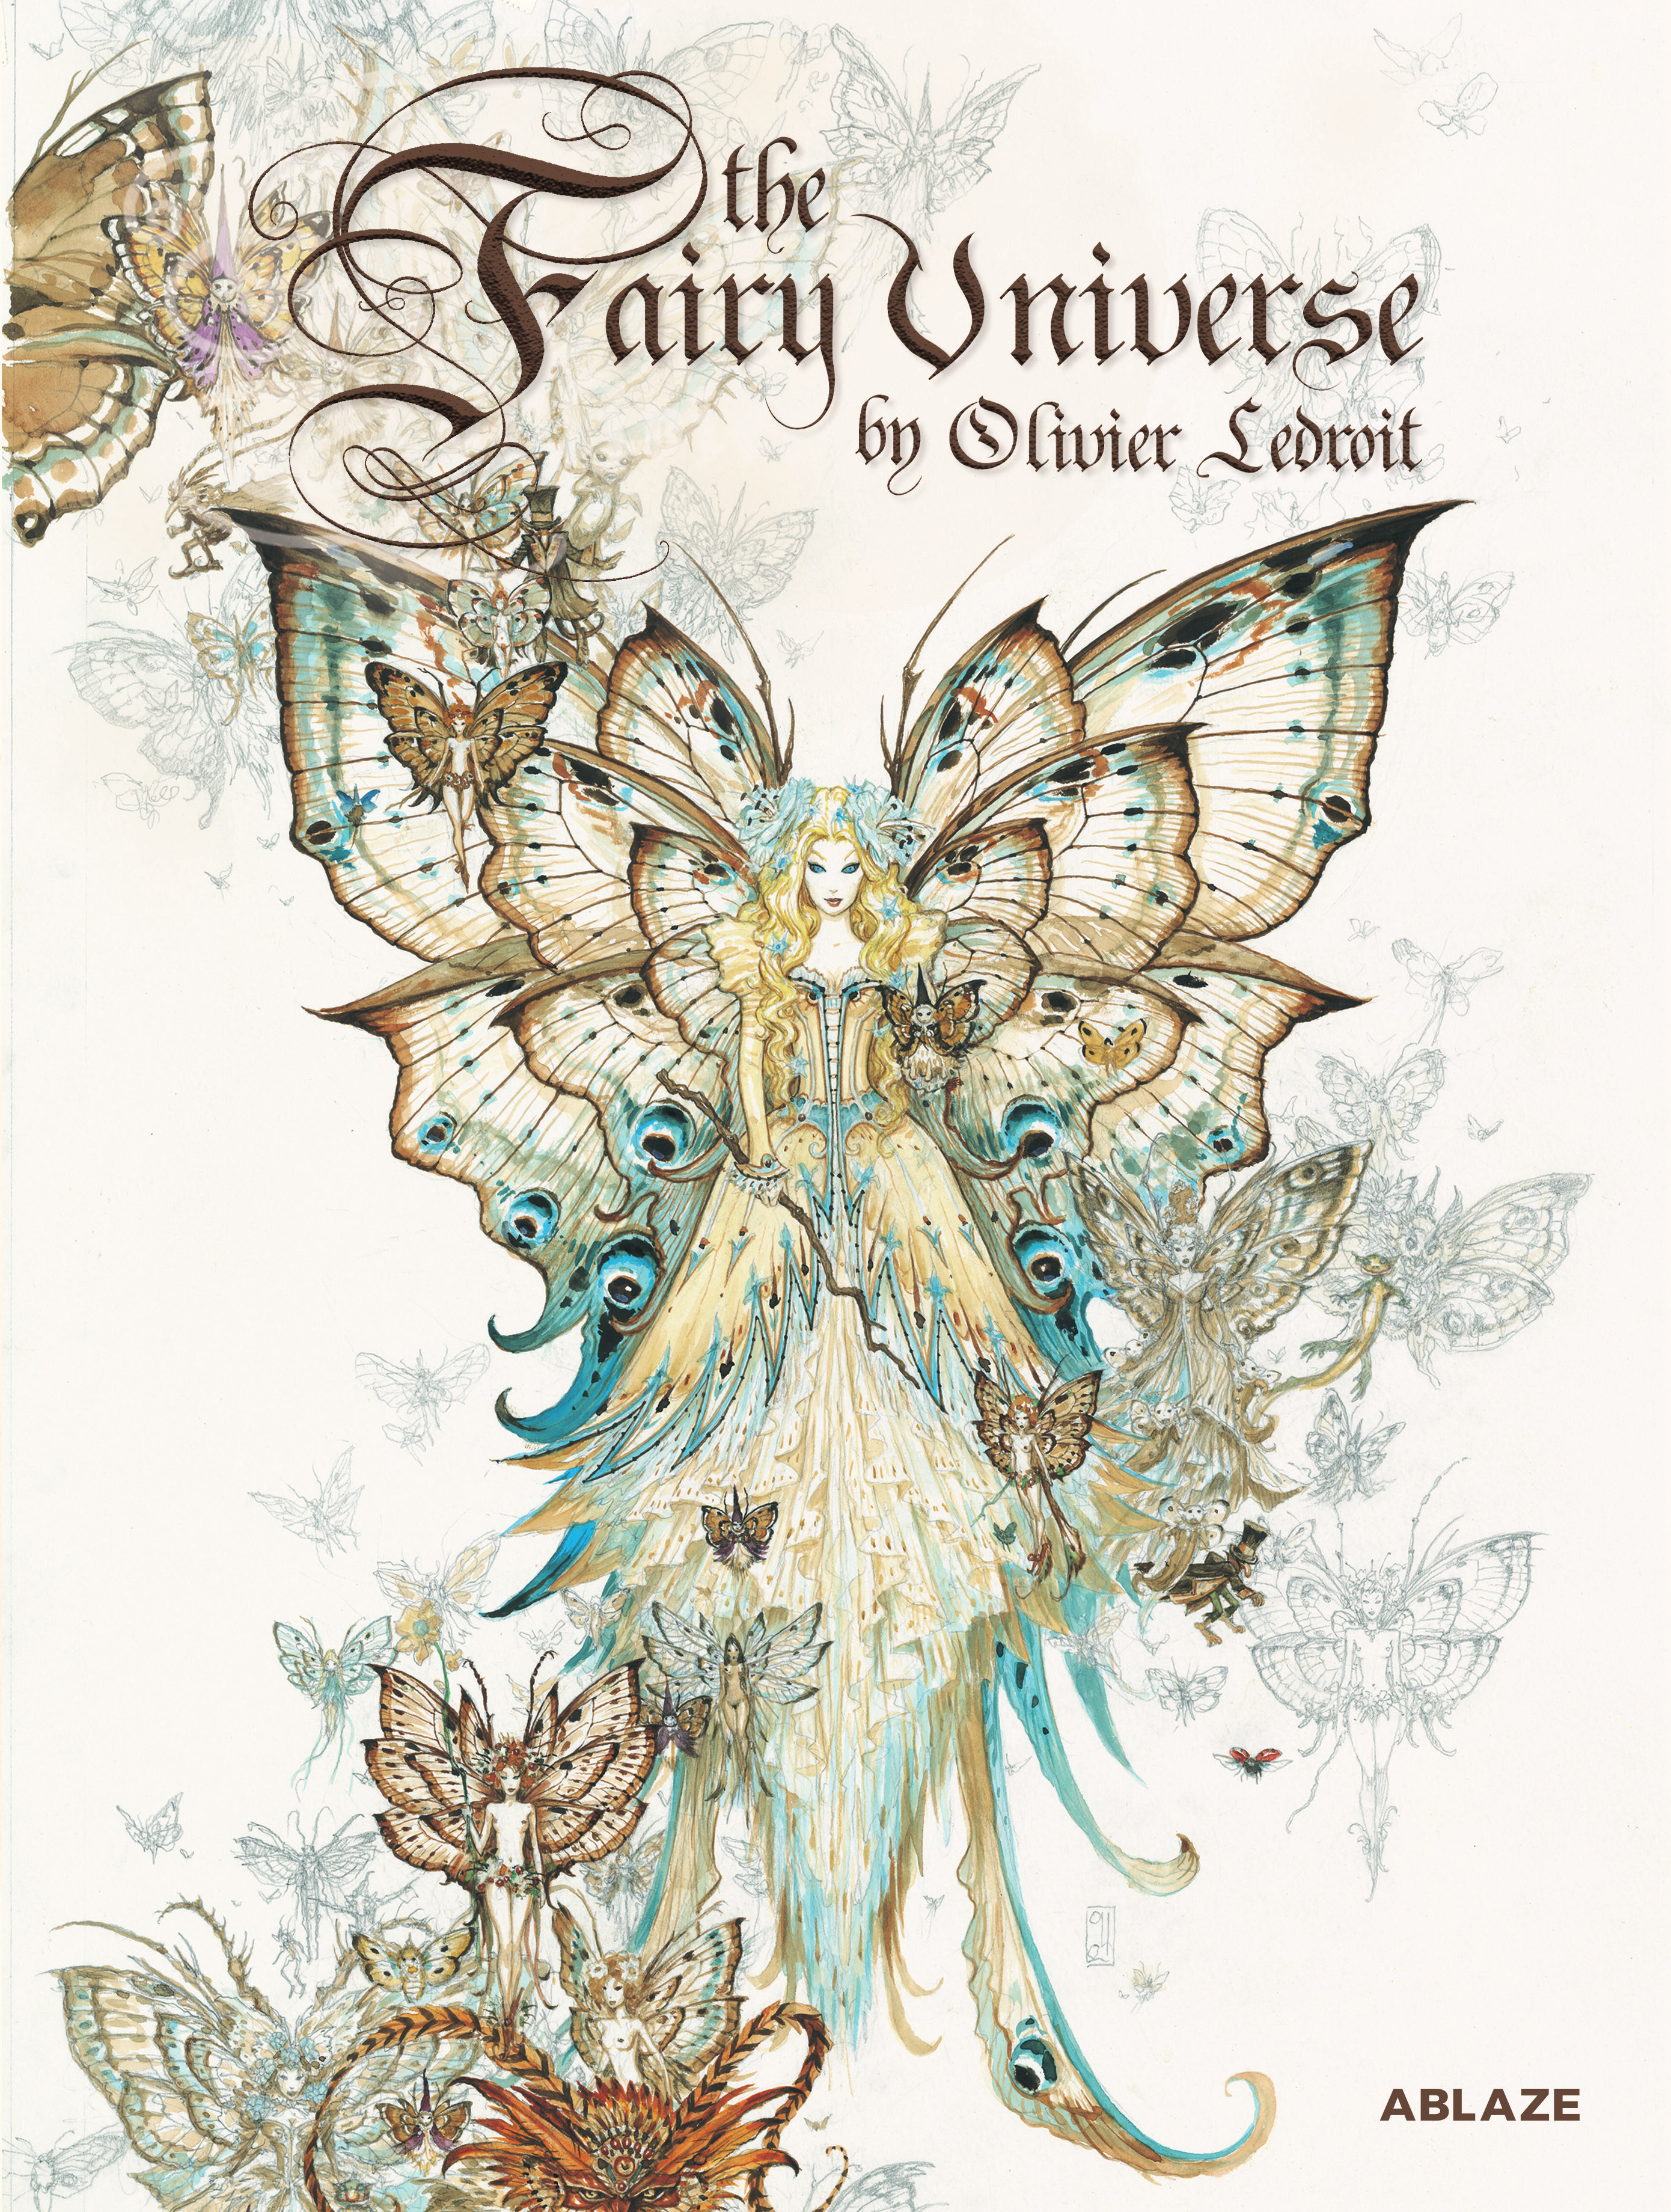 Read online The Fairy Universe comic -  Issue # TPB - 1